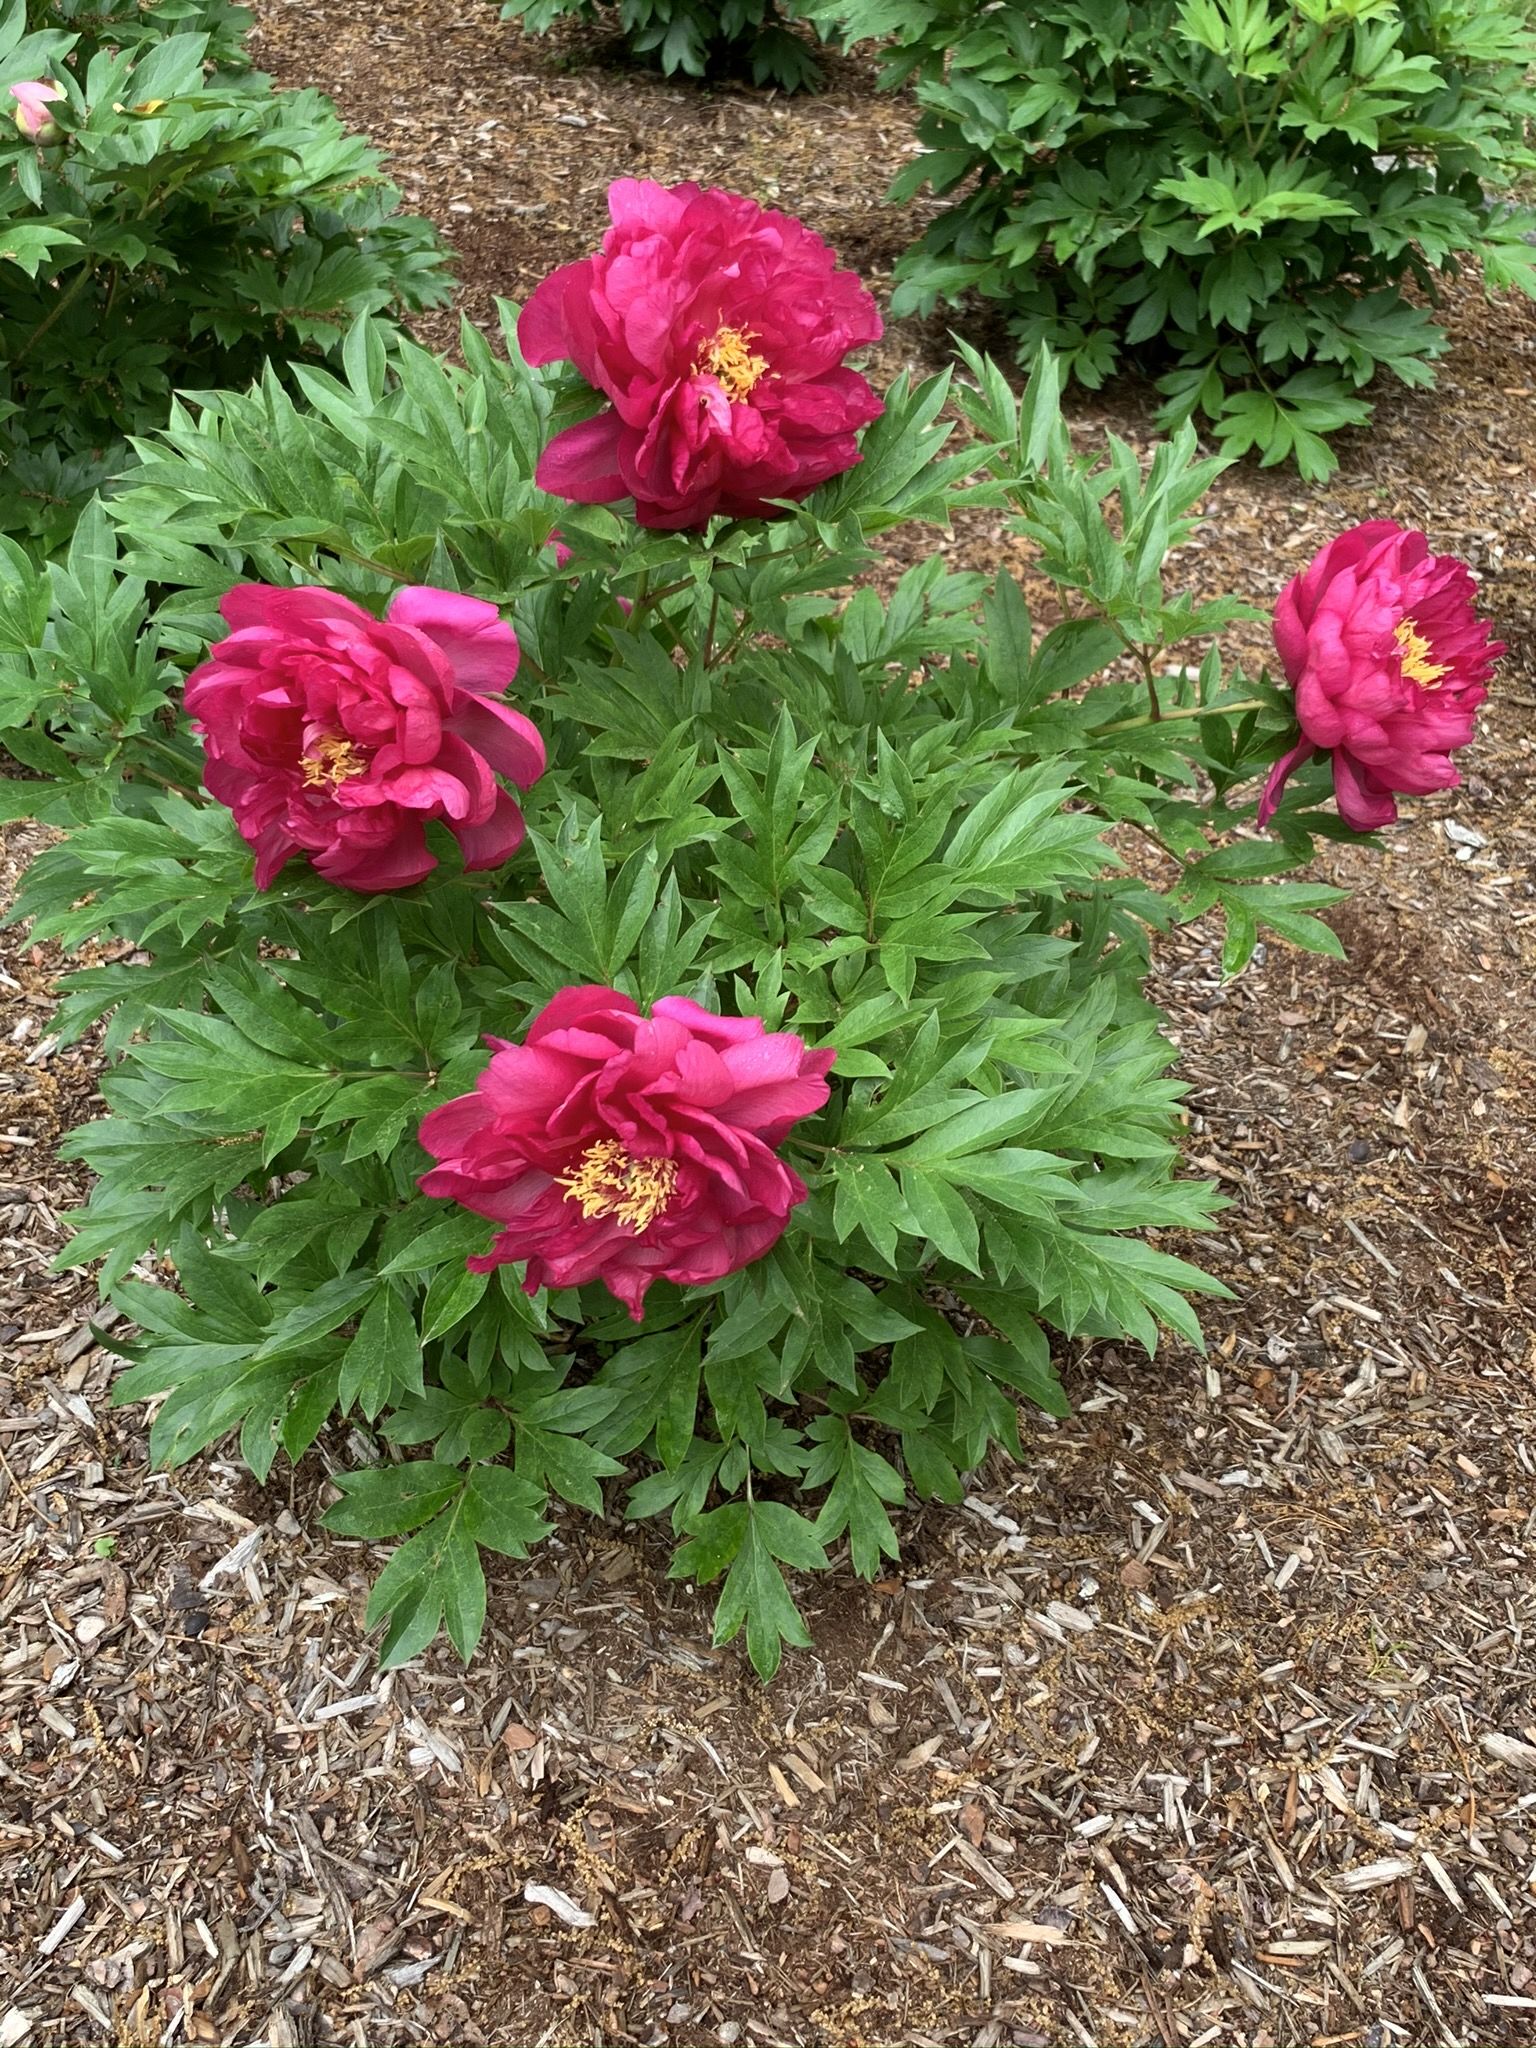 images/plants/paeonia/pae-candy-apple/pae-candy-apple-0017.JPEG